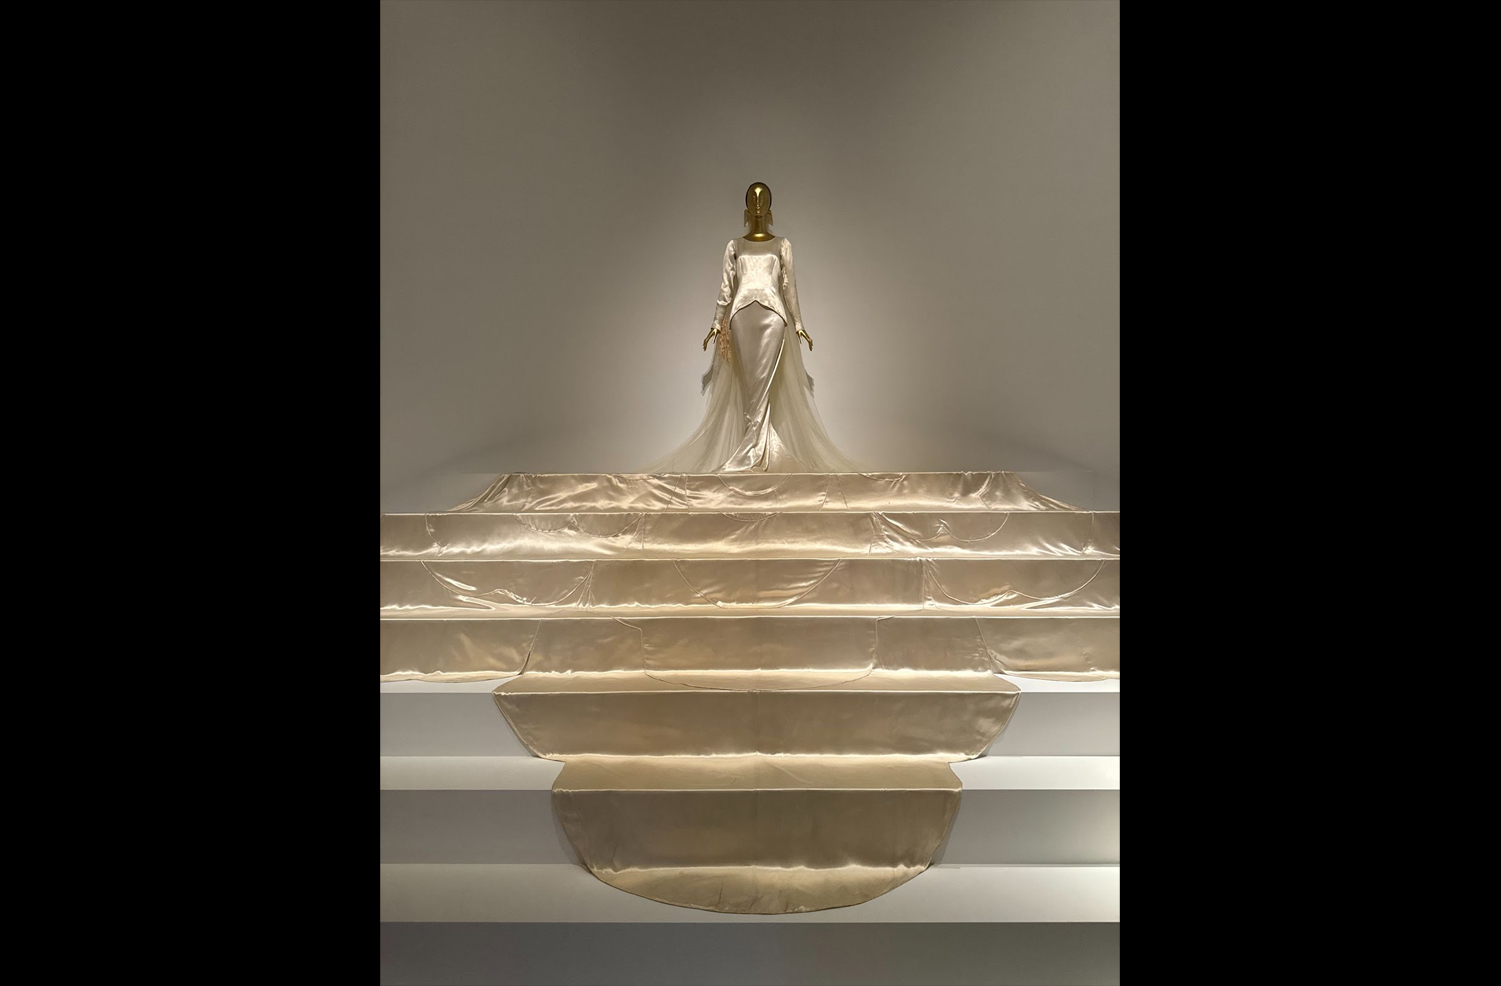 The showstopper dress that concludes the exhibit serves the purpose of a wedding dress made out of cellulose, silk, satin and lace, and was a gift to the Met from the Brooklyn Museum. 